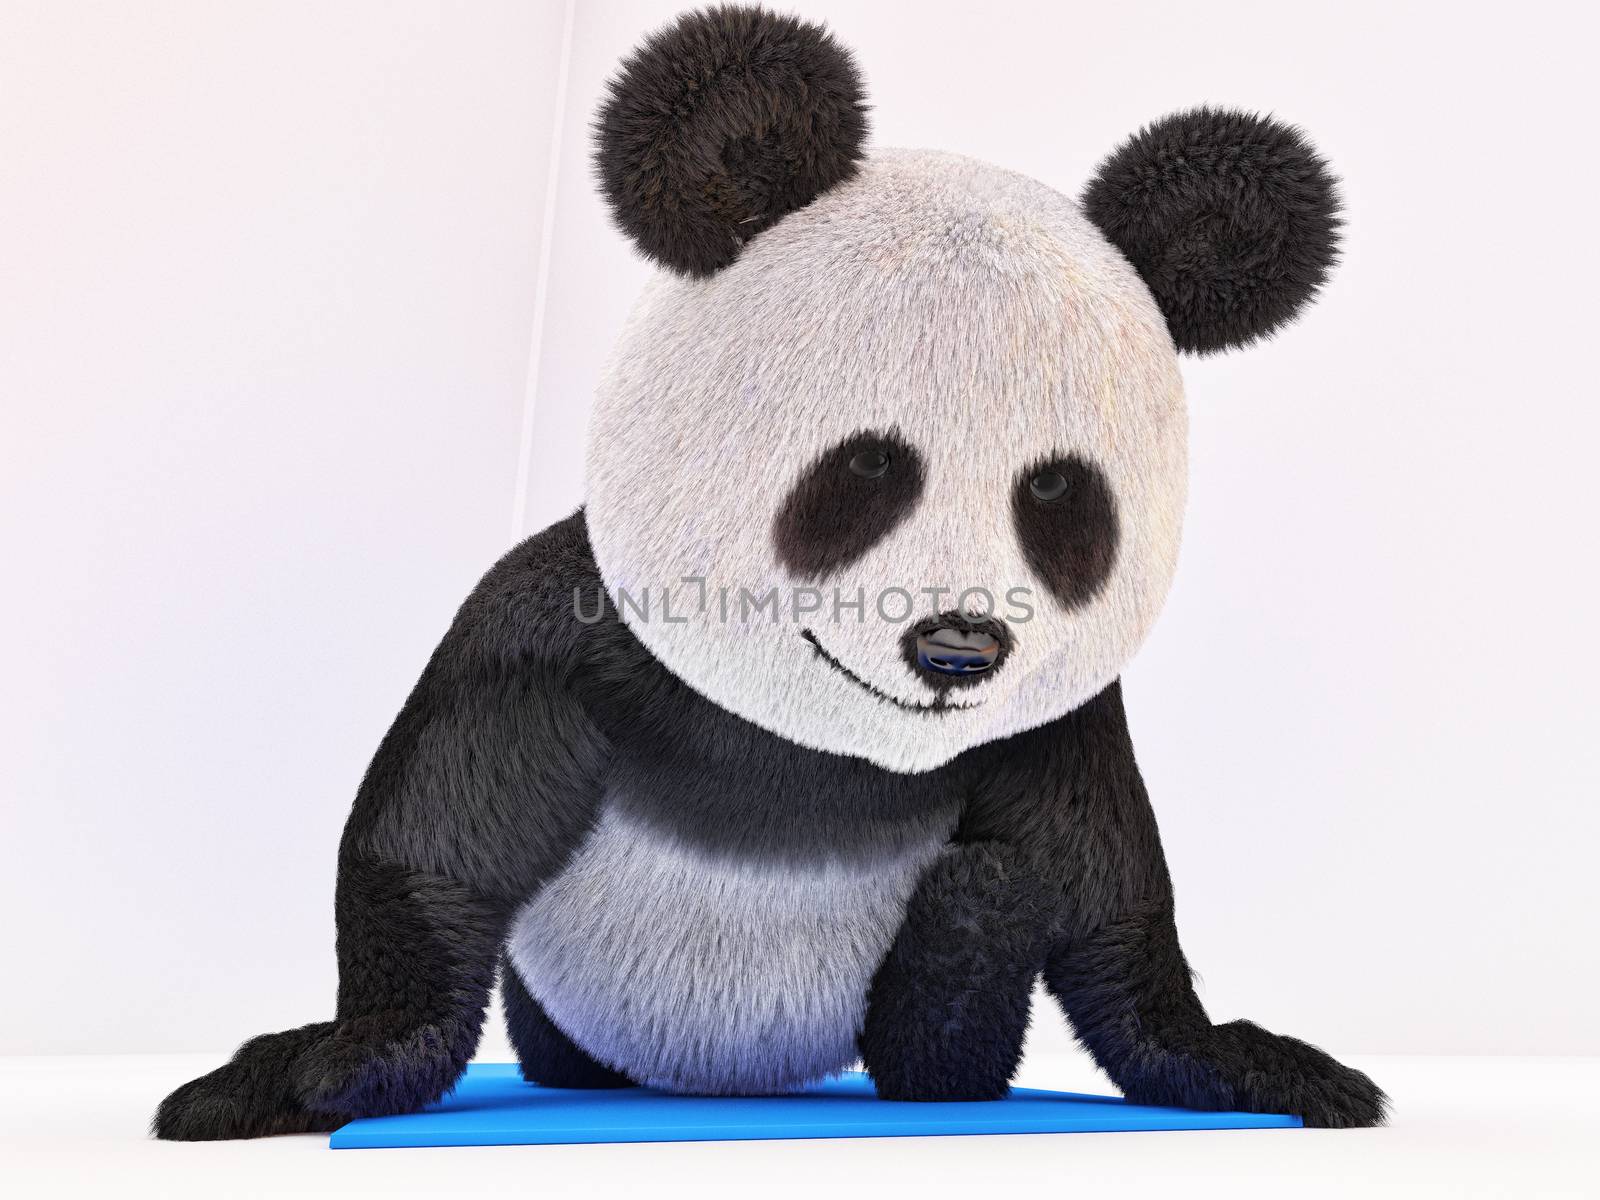 panda sitting on a blue mat and doing twine stretching